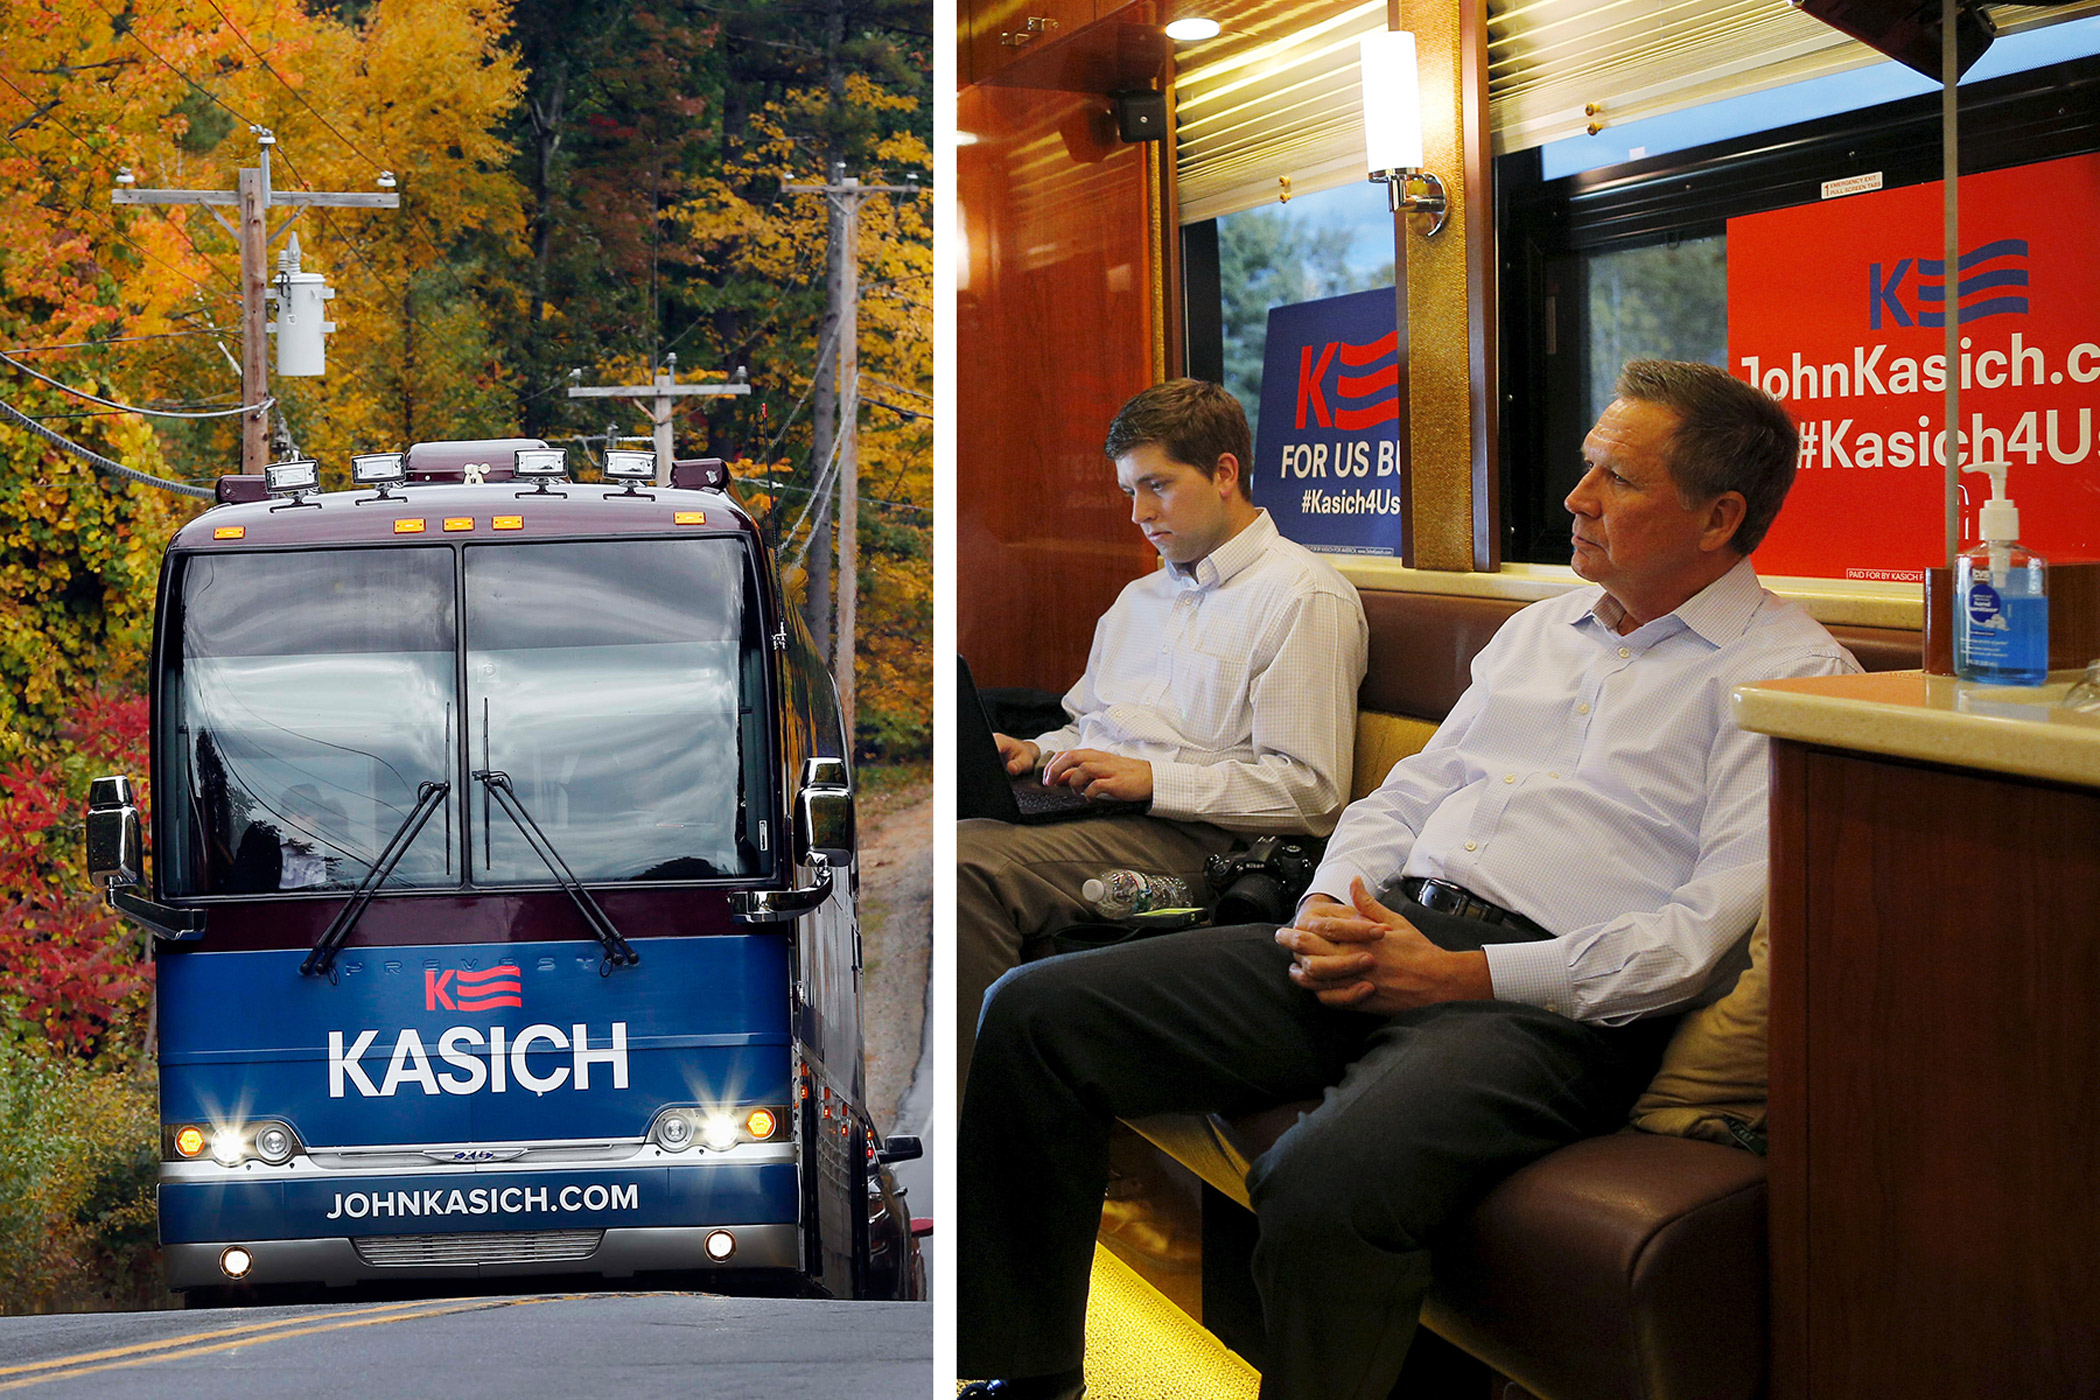 Republican presidential candidate John Kasich, at right, rides his campaign bus in Plymouth, New Hampshire on Oct. 14, 2015. At left, the exterior of Kasich's bus is seen on Oct. 13, 2015, in Bow, N.H.